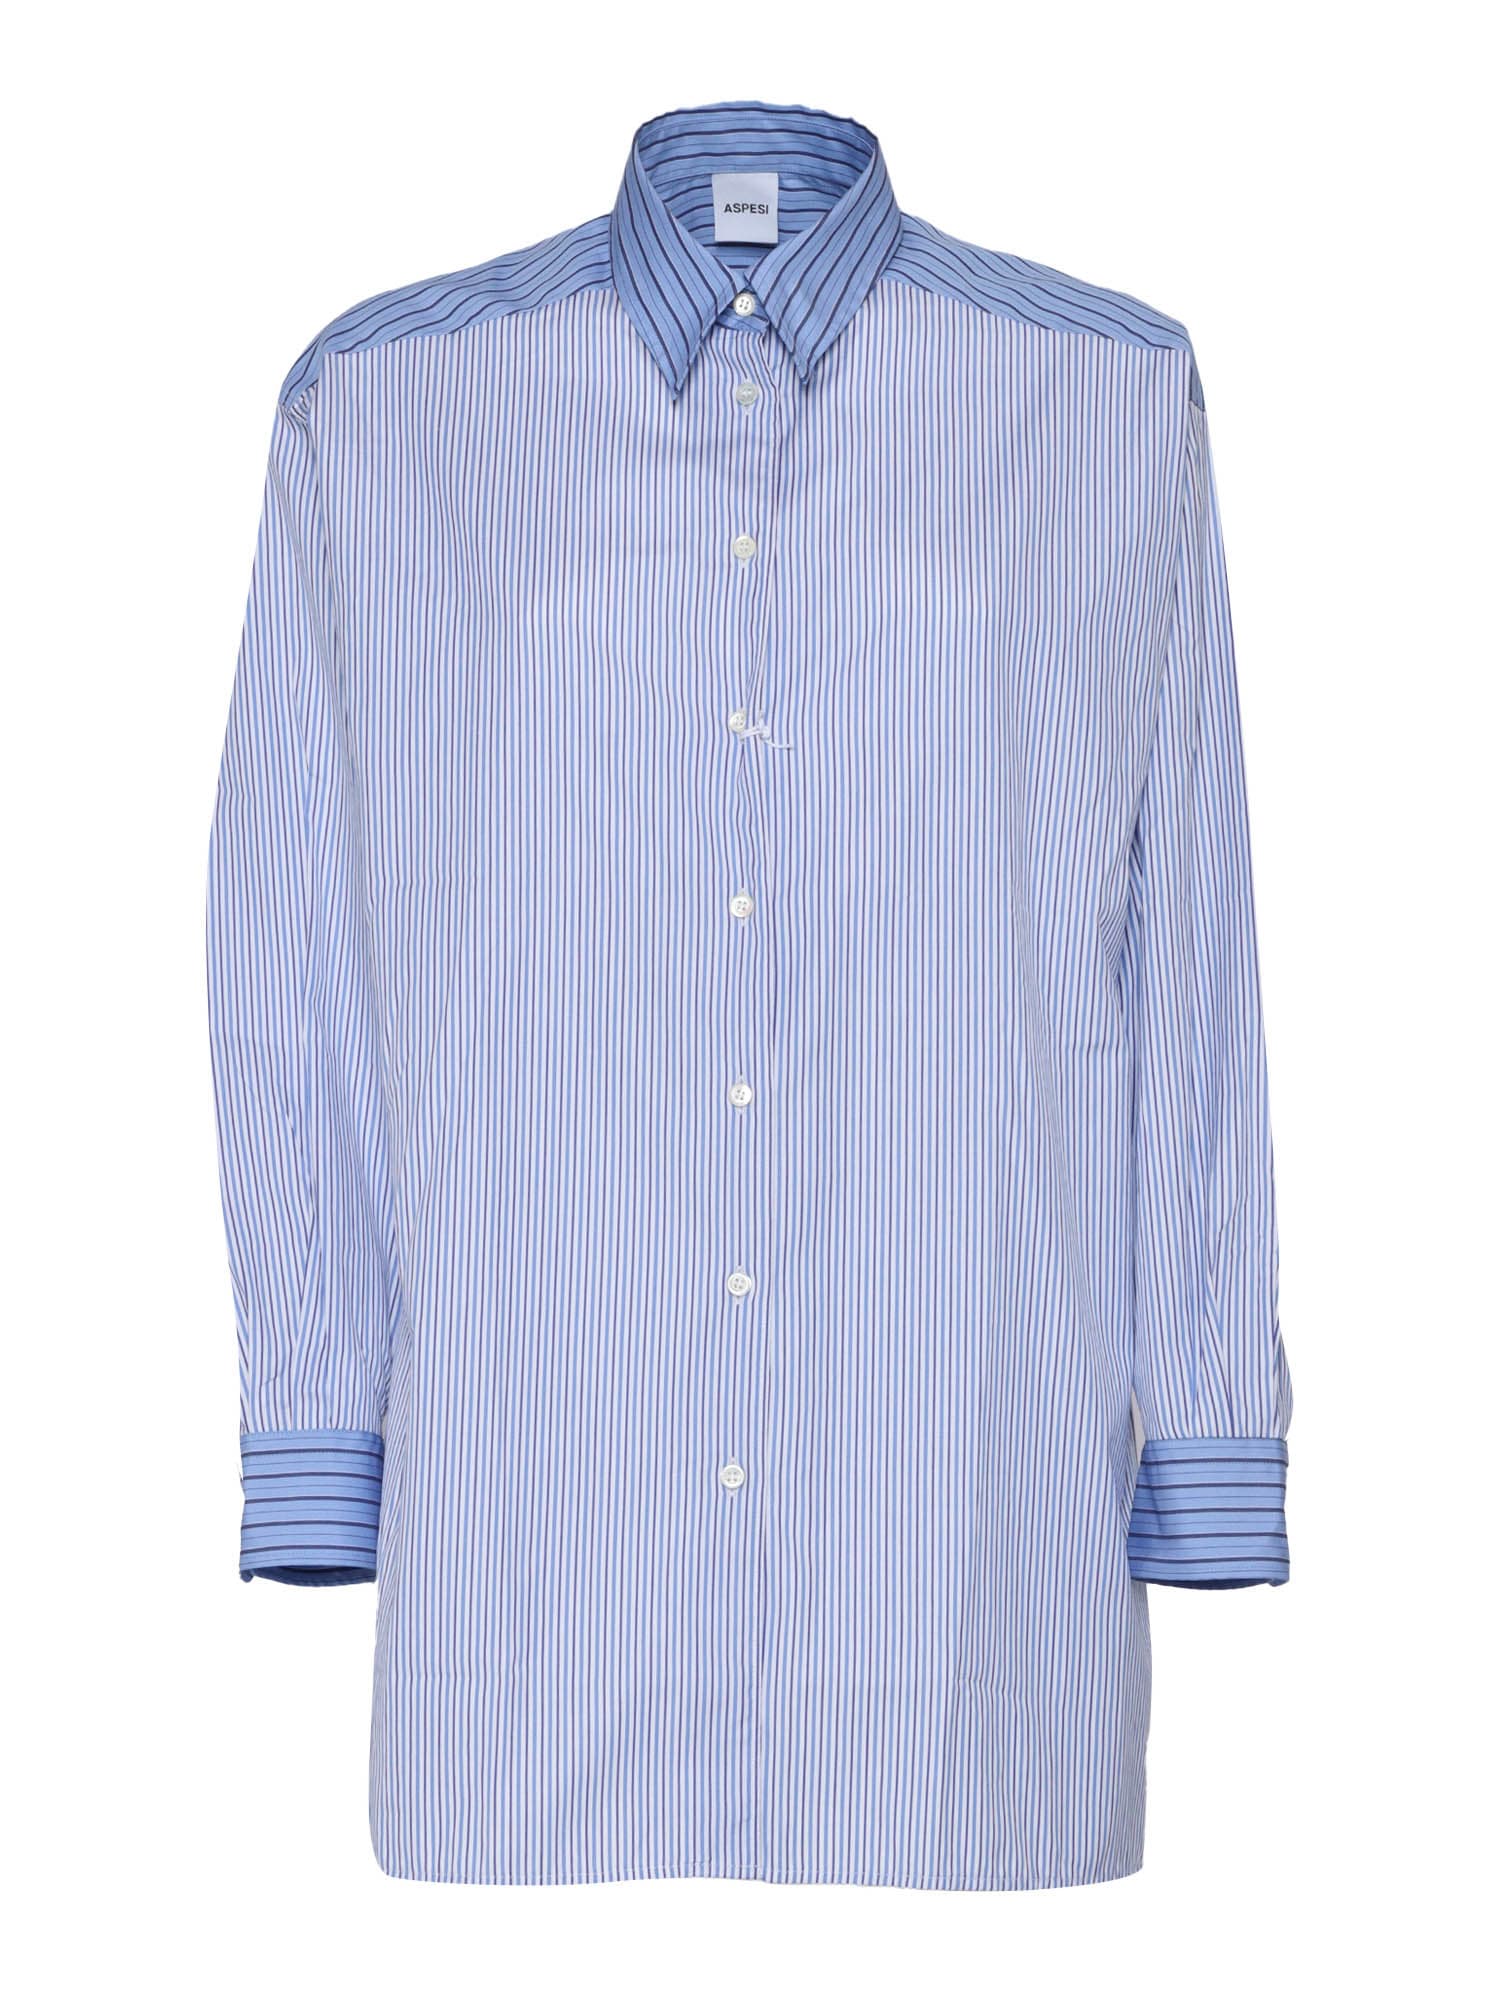 Long Striped Shirt For Women In Cotton With Contrasting Collar And Cuffs, Classic Collar, Loose Fit.